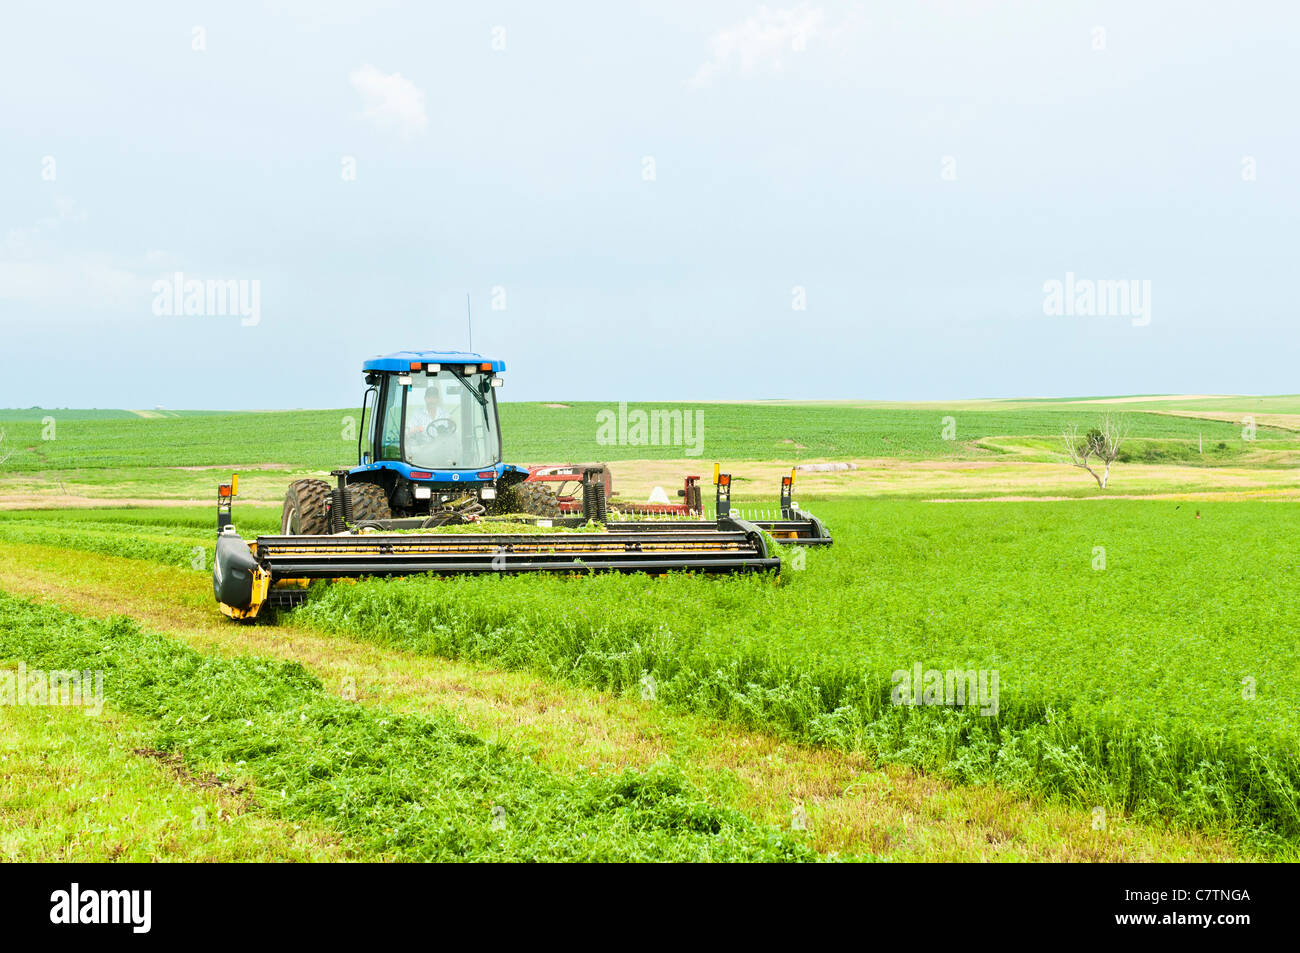 Mature alfalfa is mowed and windrowed on a farm in South Dakota. Stock Photo